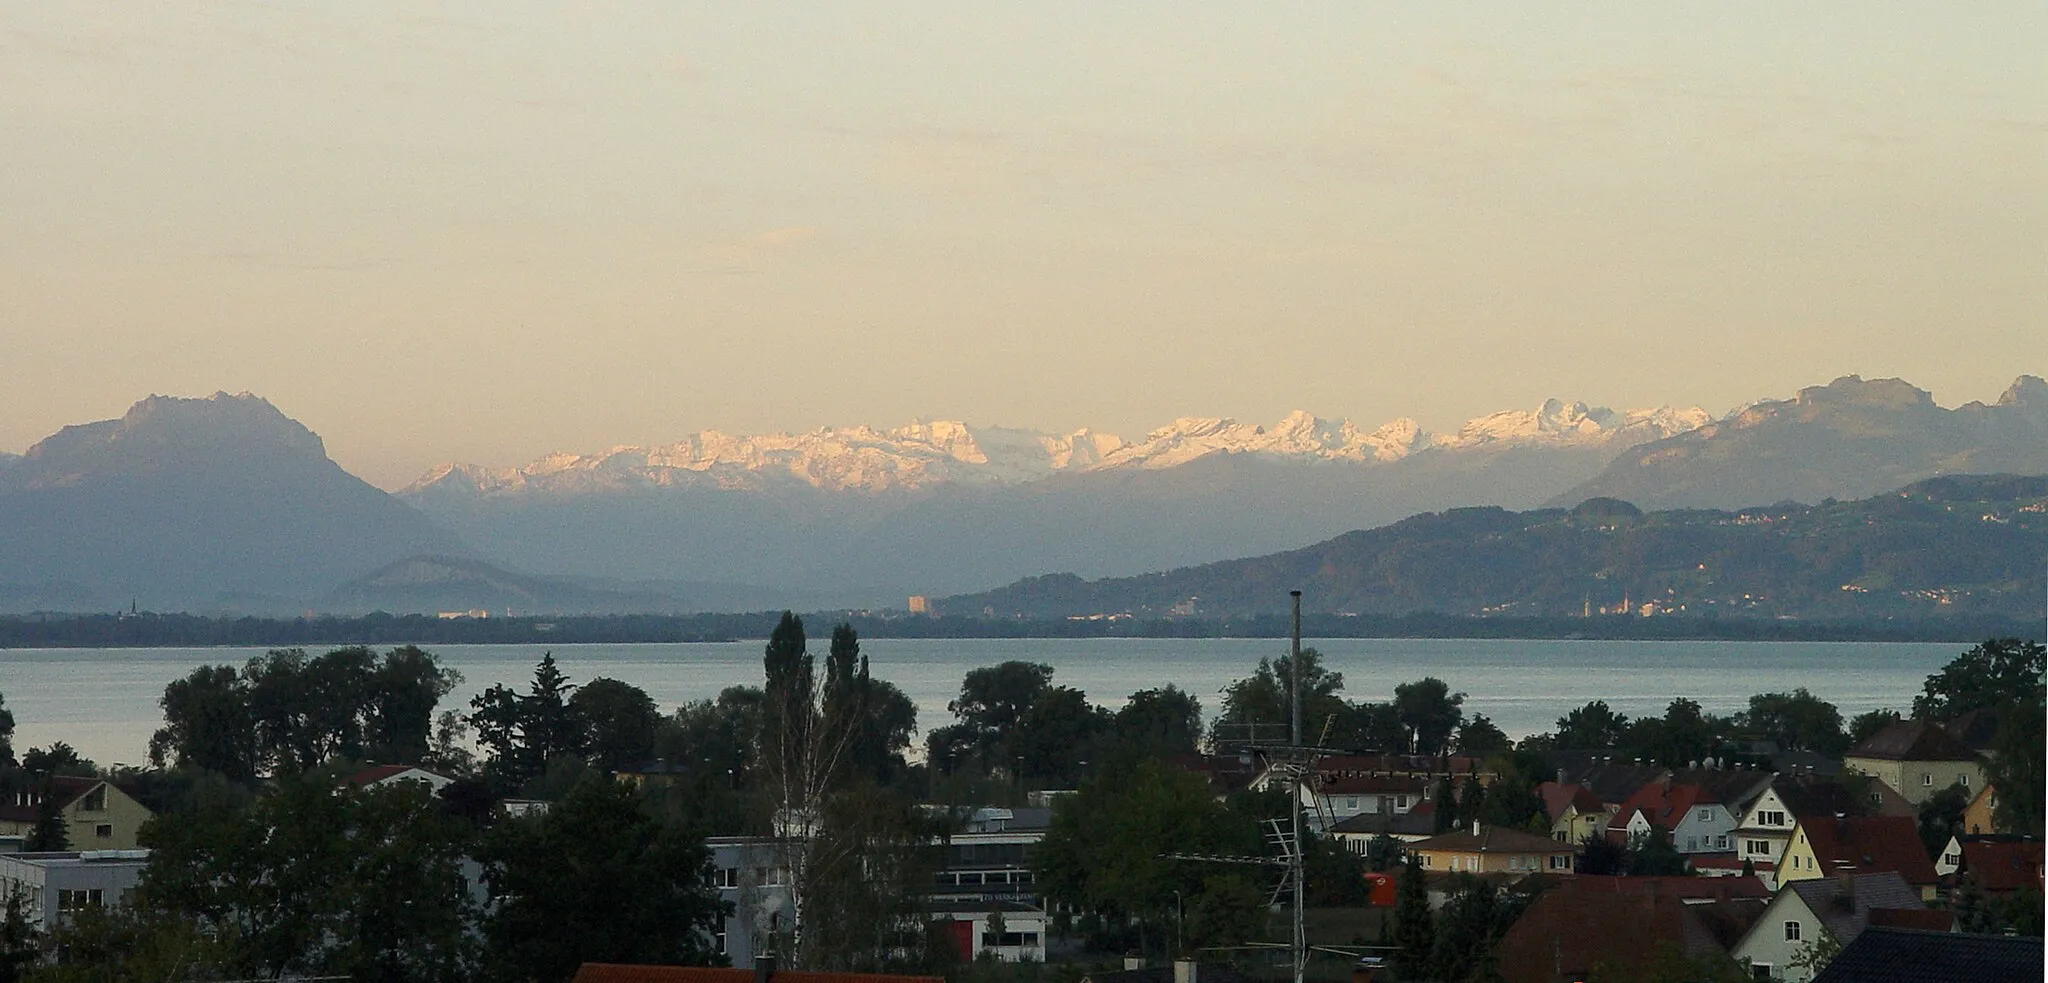 Photo showing: Glarus Alps (Switzerland) at sunrise, seen from Lindau-Reutin (Bavaria, Germany) across the lake of Constance. Distance approx. 100 km. Left side drei Schwestern ('three sisters'), Austria